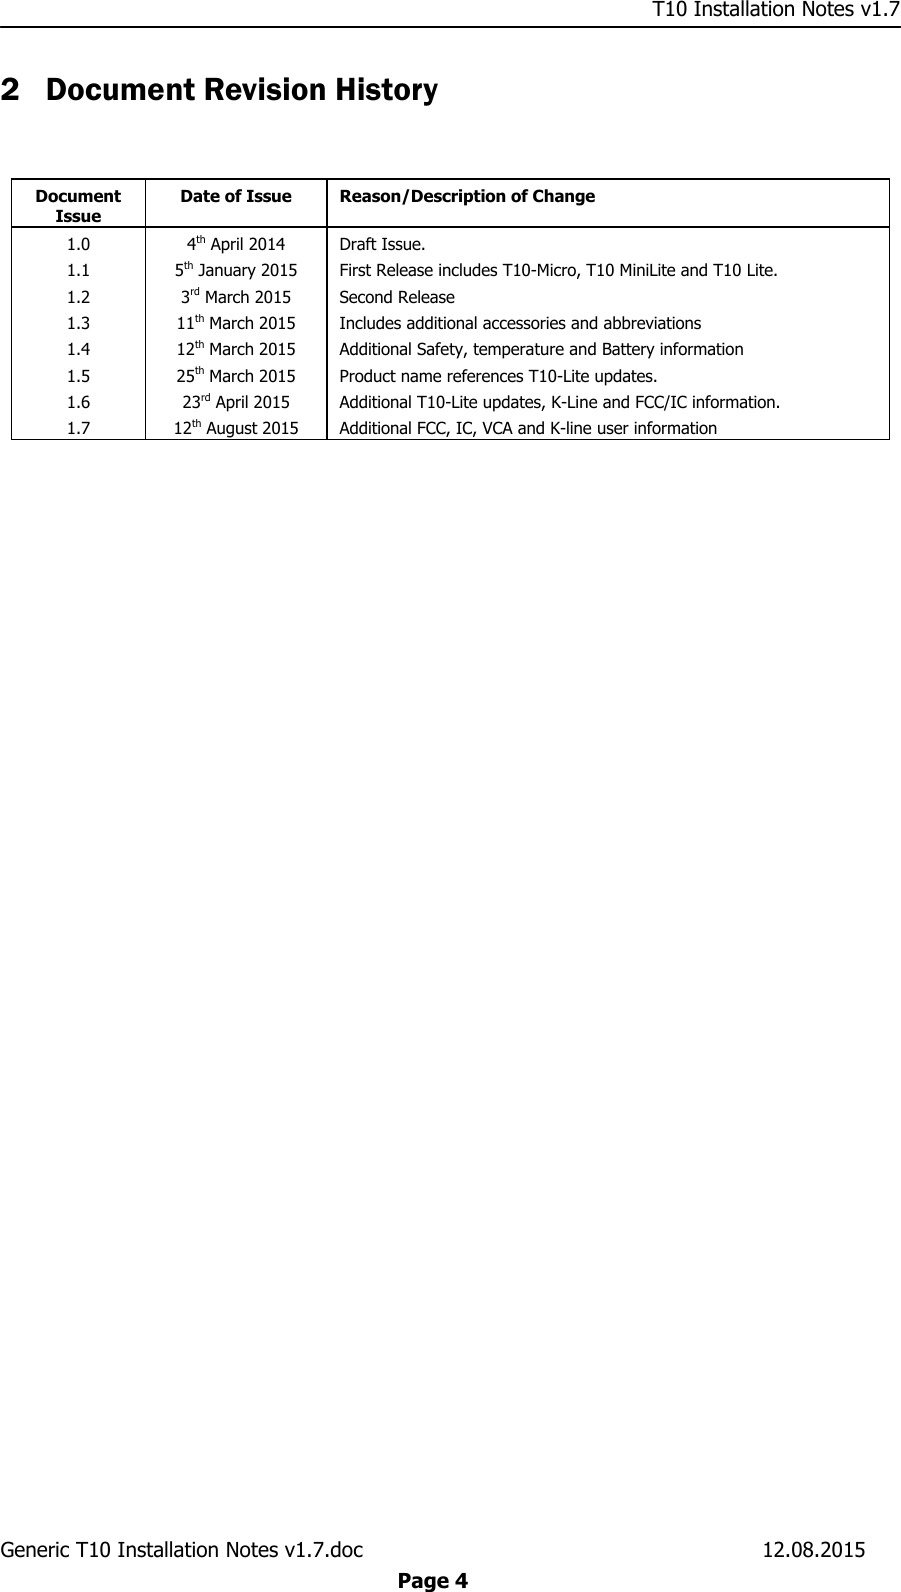     T10 Installation Notes v1.7 Generic T10 Installation Notes v1.7.doc    12.08.2015  Page 4 2 Document Revision History  Document Issue Date of Issue Reason/Description of Change 1.0 1.1 1.2 1.3 1.4 1.5 1.6 1.7 4th April 2014 5th January 2015 3rd March 2015 11th March 2015 12th March 2015 25th March 2015 23rd April 2015 12th August 2015 Draft Issue. First Release includes T10-Micro, T10 MiniLite and T10 Lite. Second Release Includes additional accessories and abbreviations Additional Safety, temperature and Battery information Product name references T10-Lite updates. Additional T10-Lite updates, K-Line and FCC/IC information. Additional FCC, IC, VCA and K-line user information  